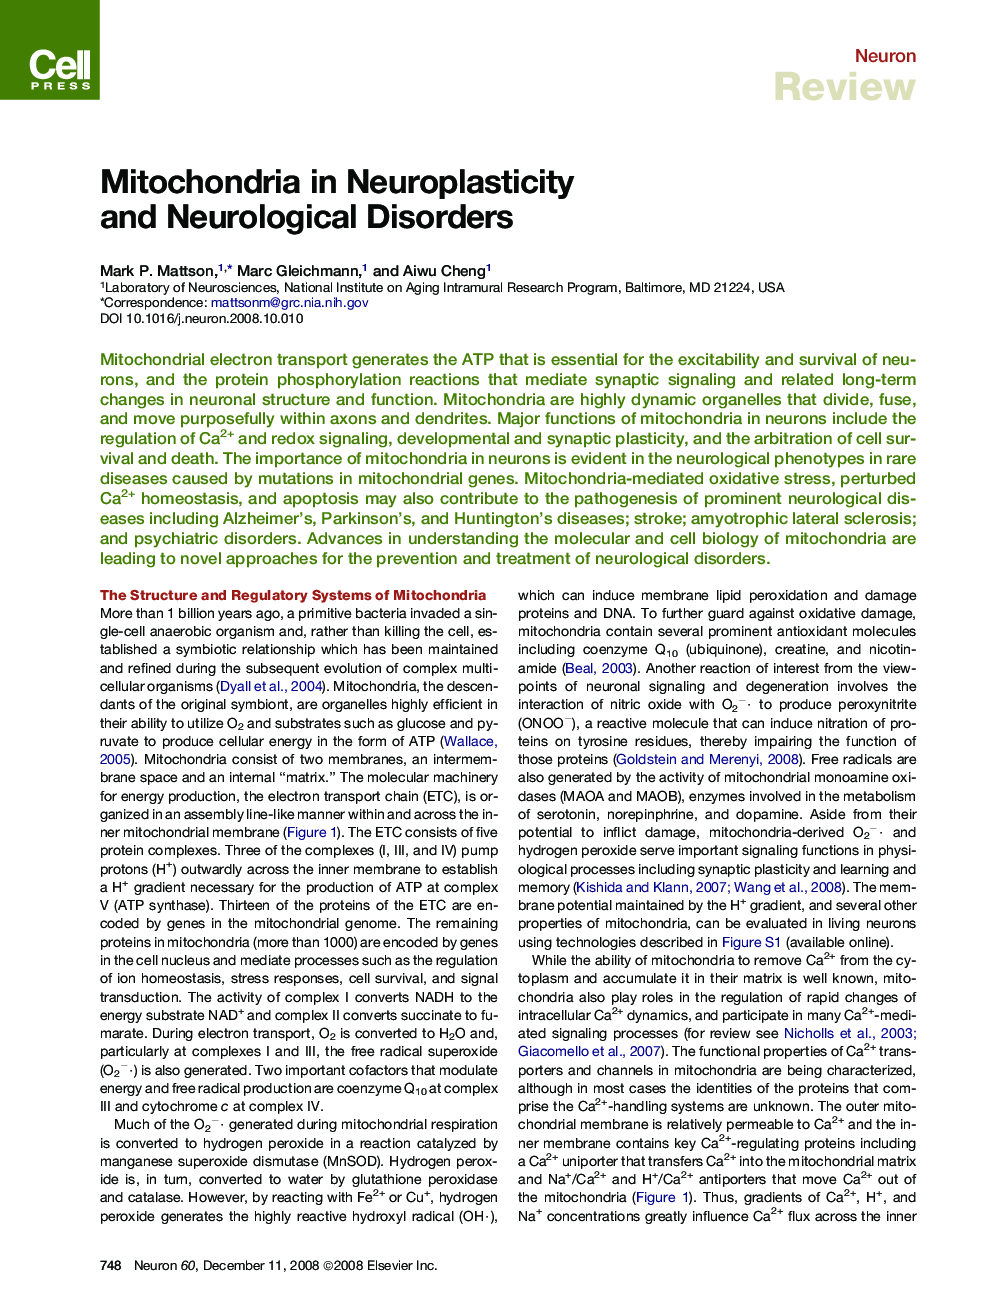 Mitochondria in Neuroplasticity and Neurological Disorders